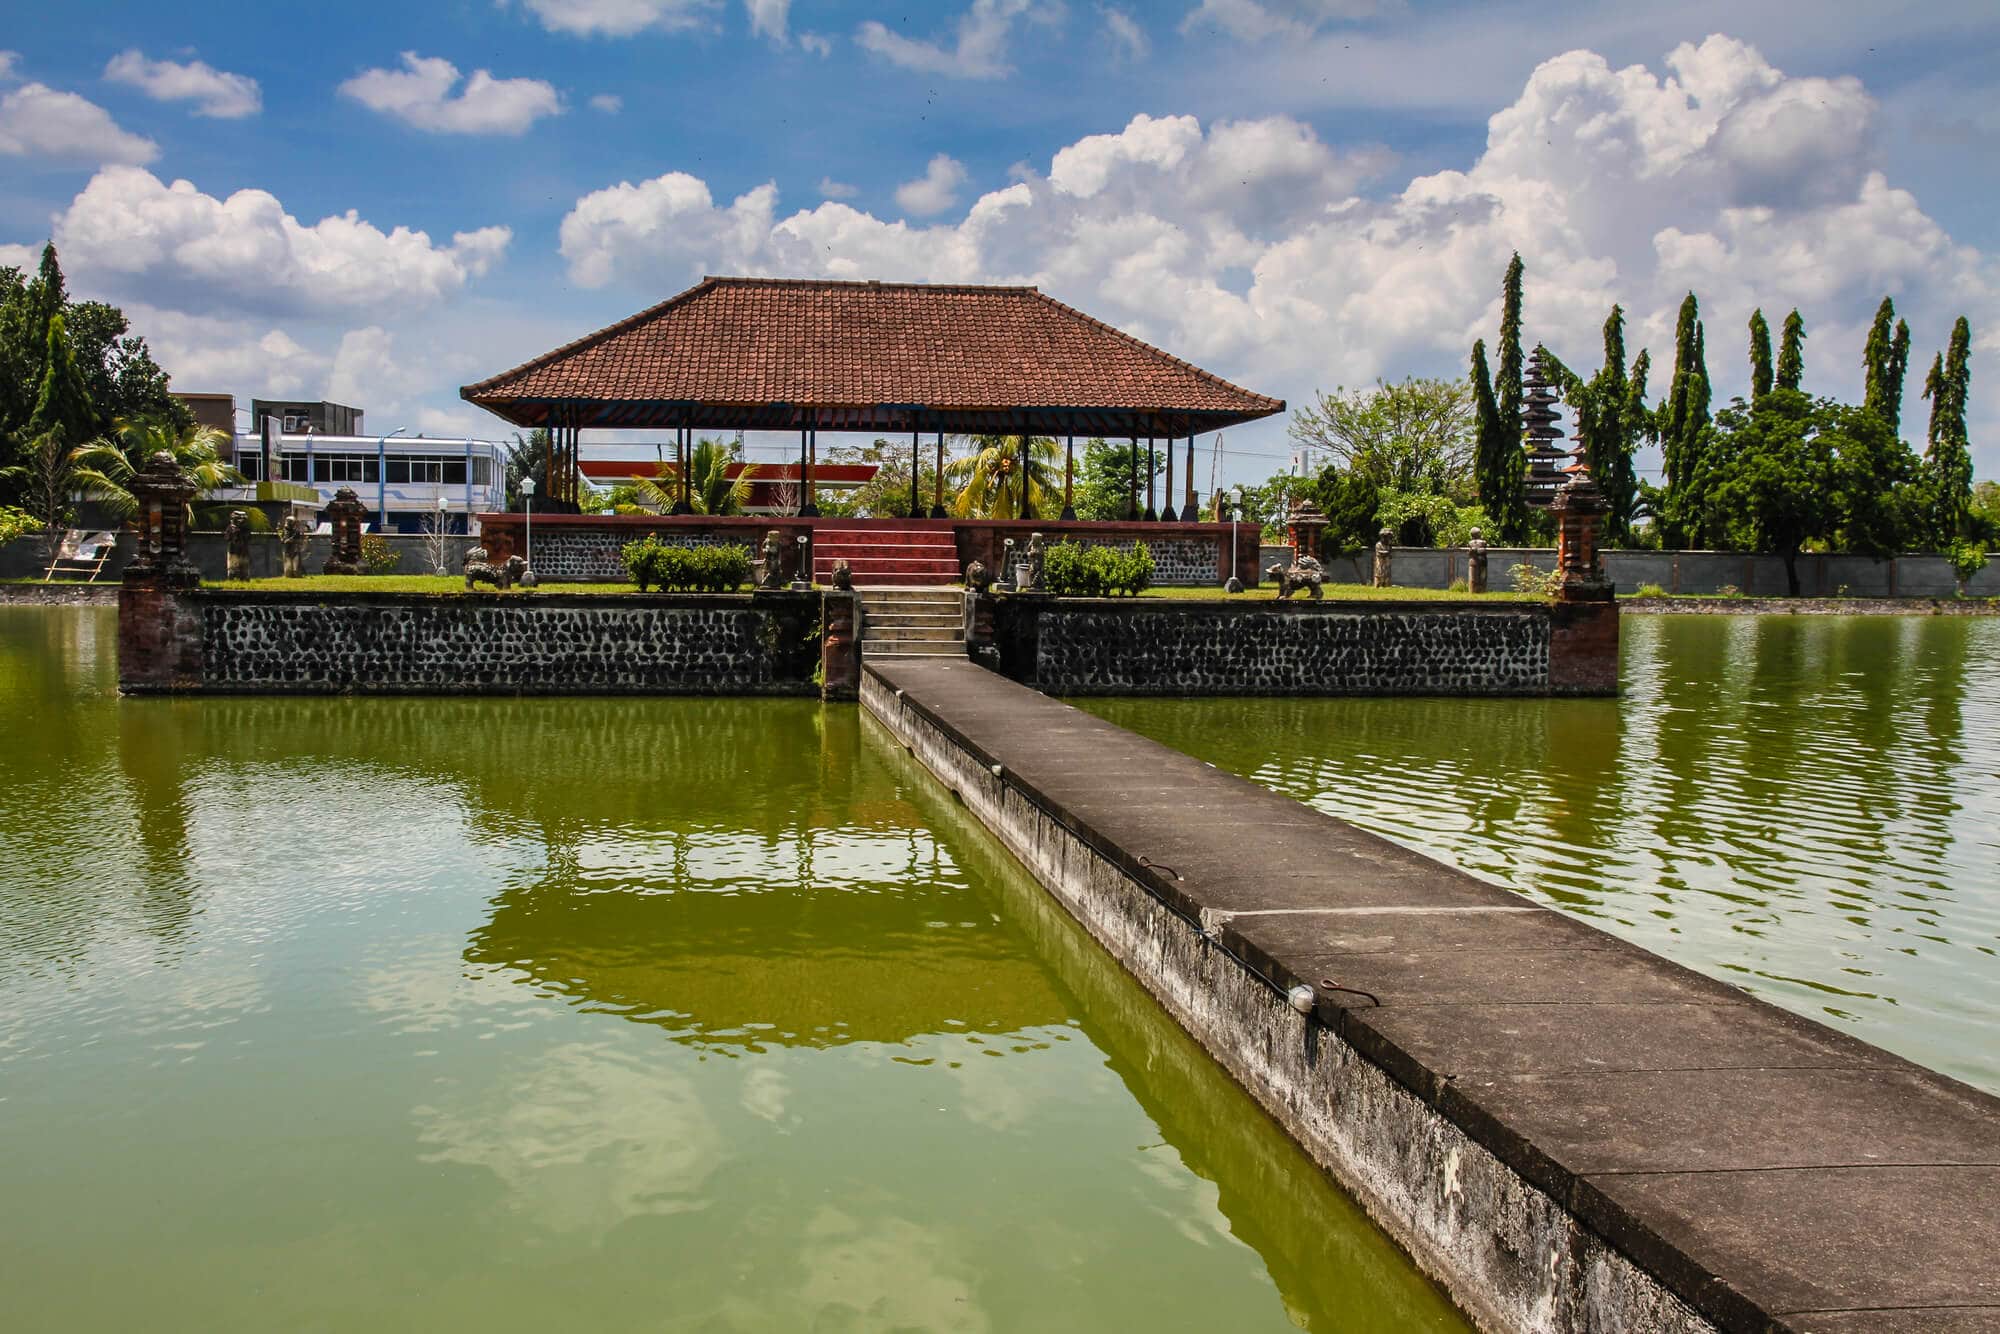 Mayura Water Palace surrunded by green water with a stone walkway leading to it, one of the top sights to see in Lombok.